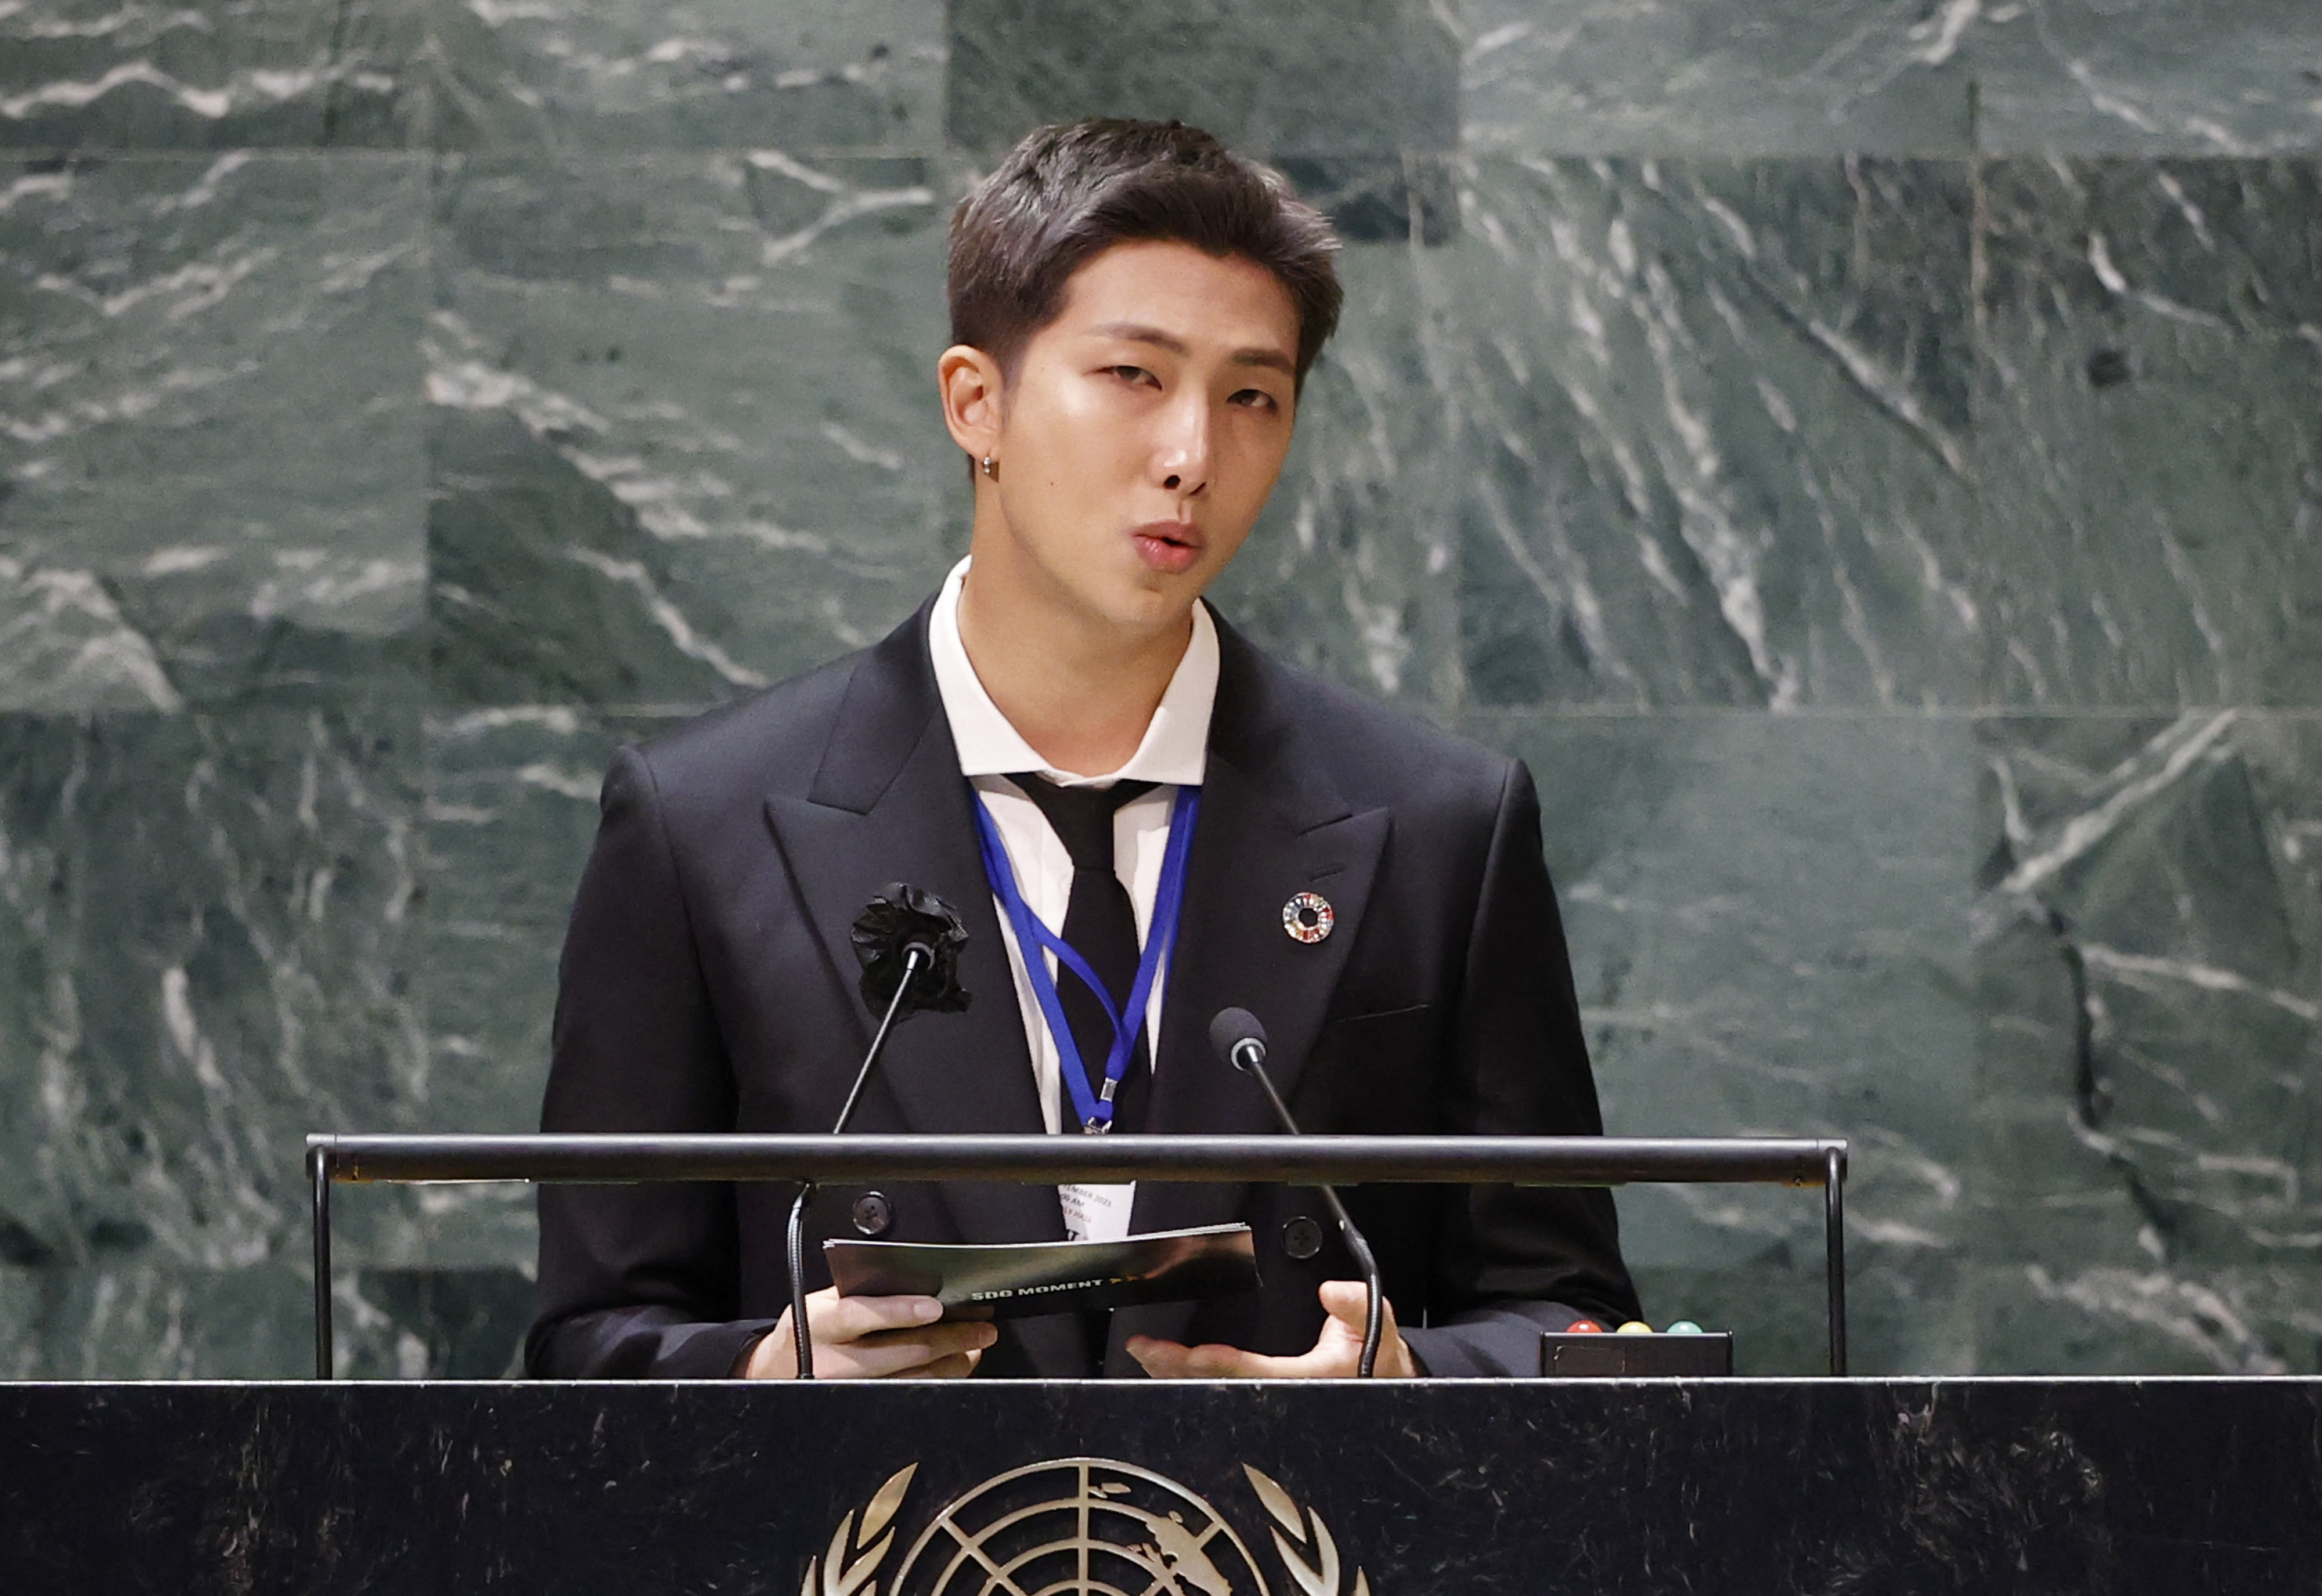 RM of boy band BTS speaks at the UN General Assembly 76th session General Debate